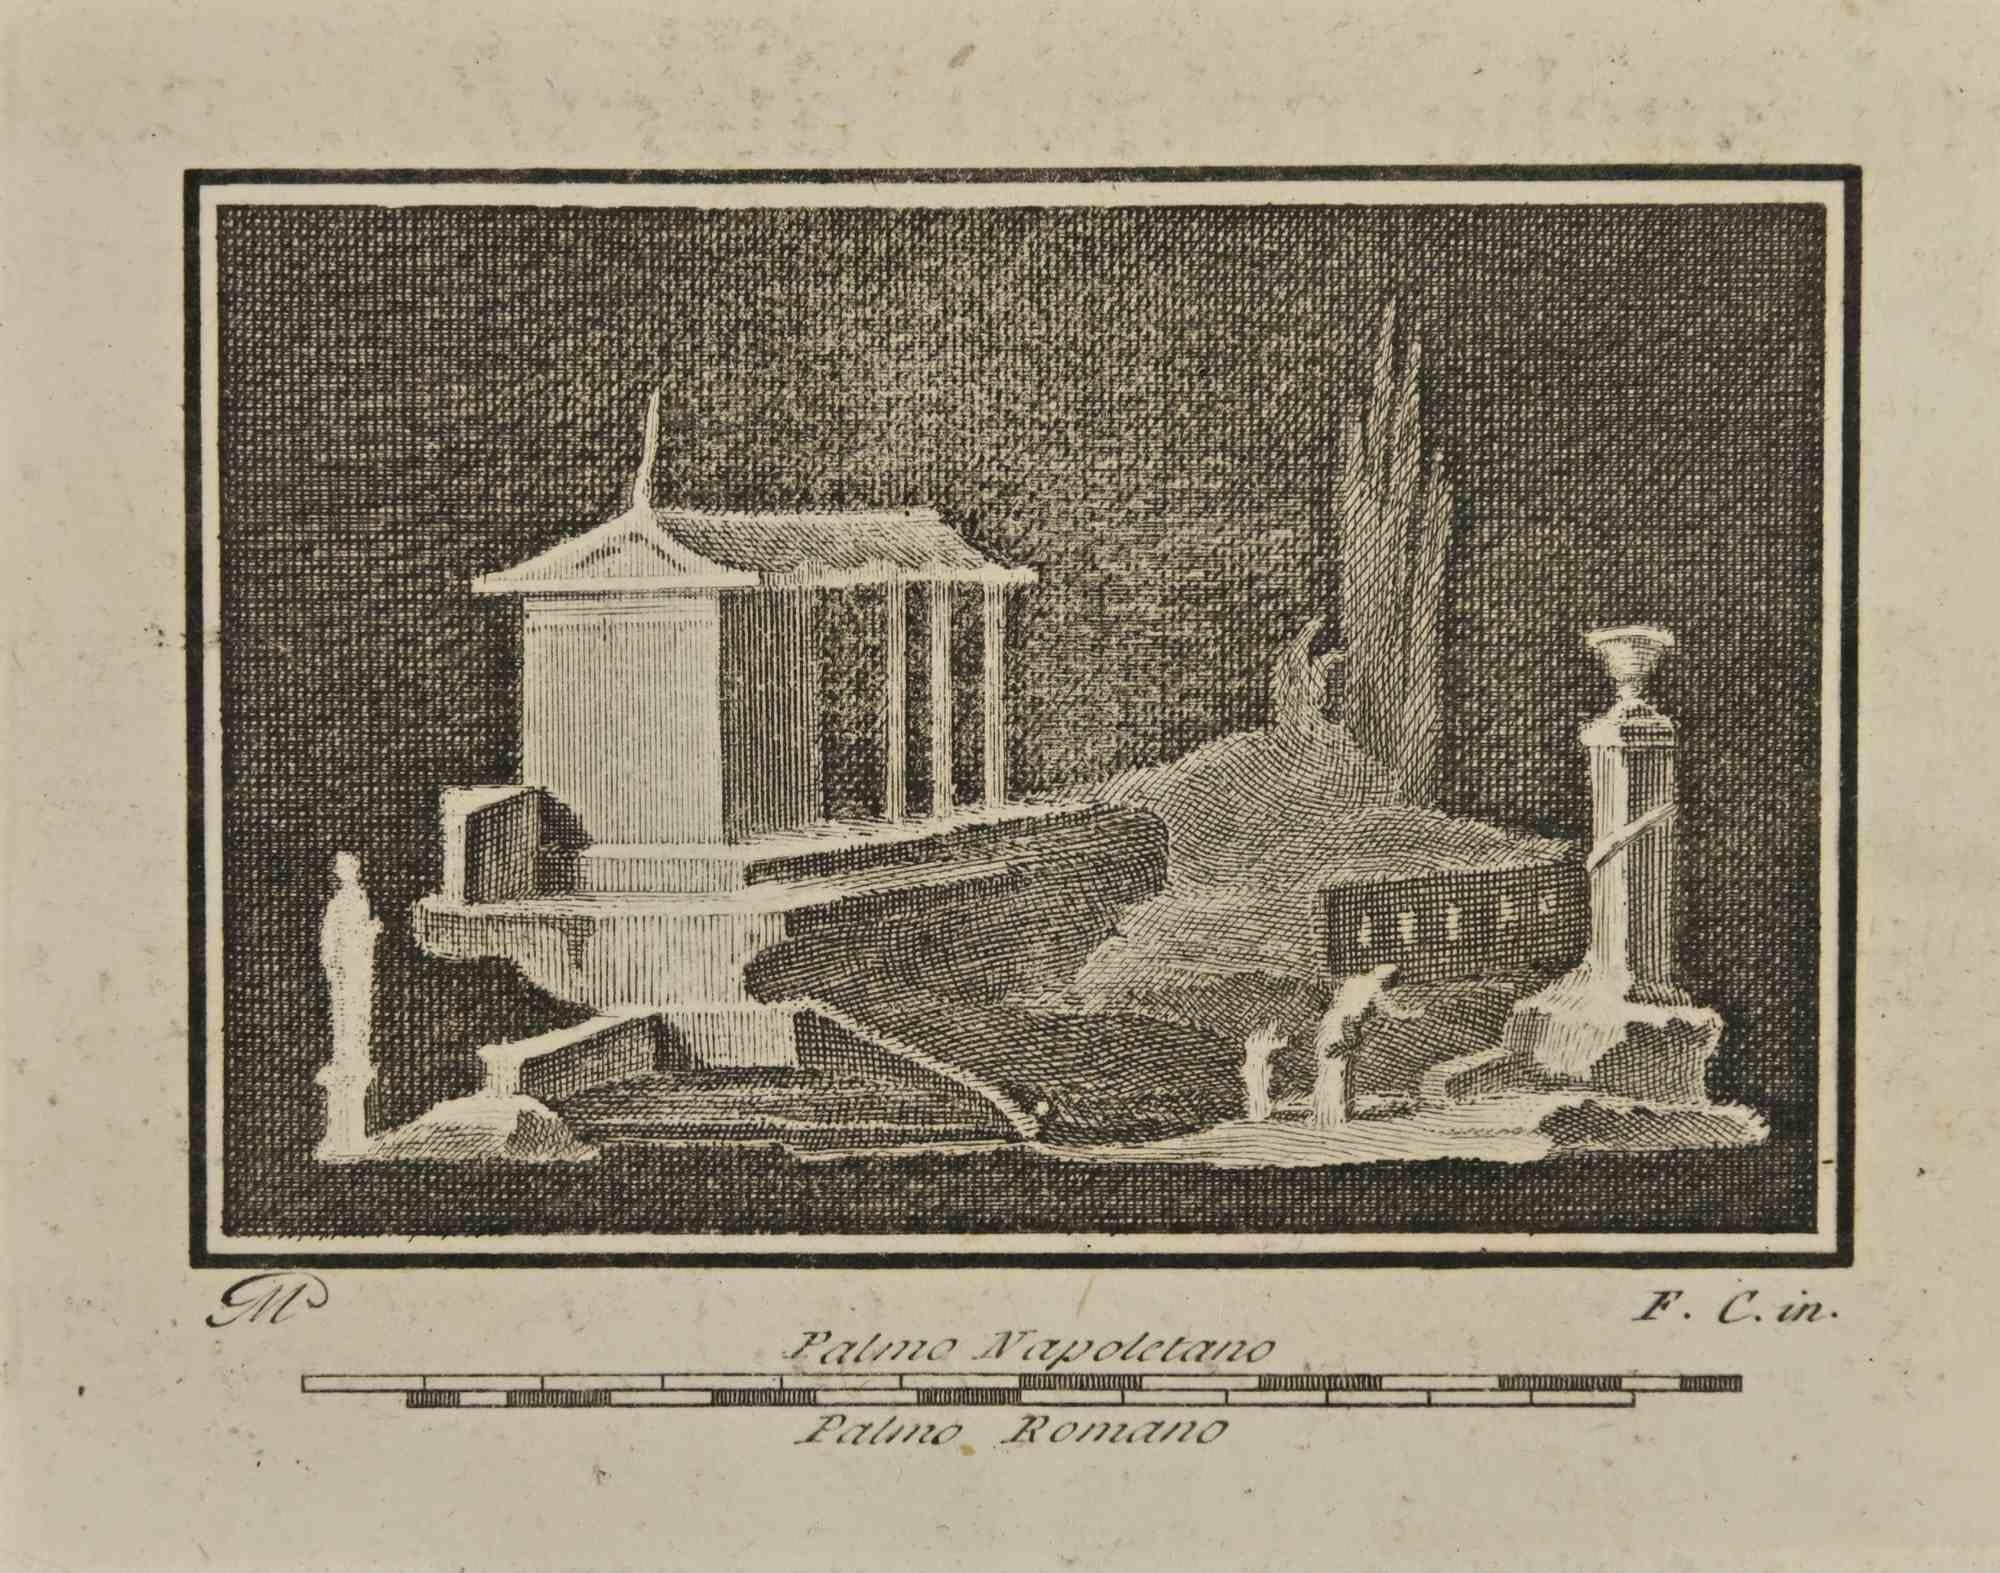 Unknown Figurative Print - Ancient Roman Landscape - Etching by Various Authors - 18th Century